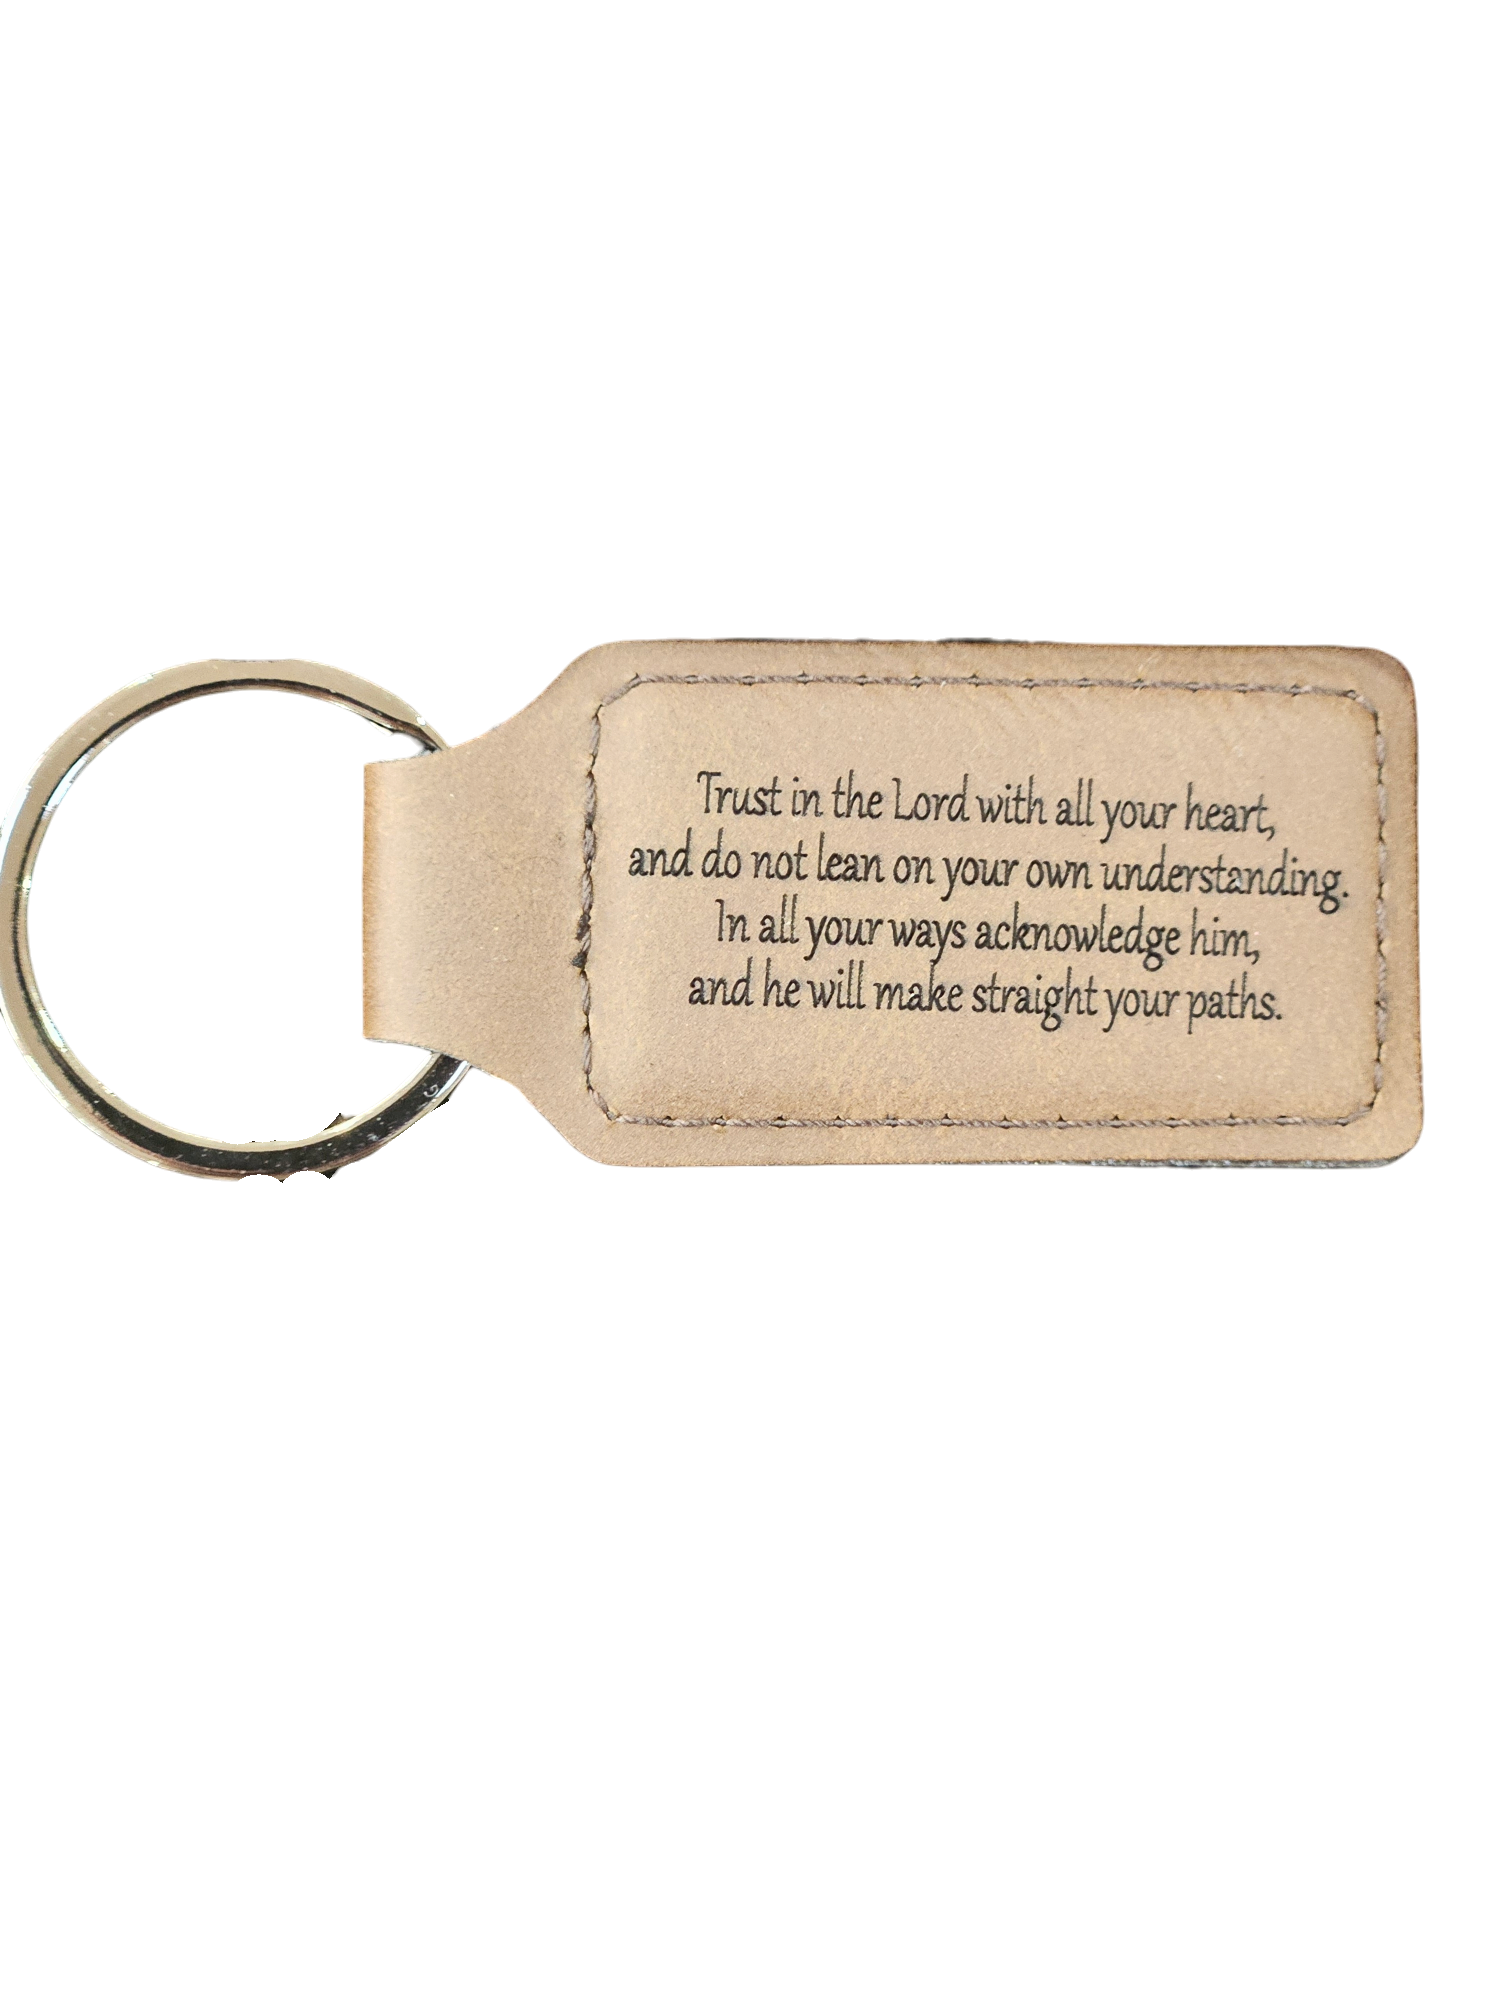 Trust in the Lord - keychain